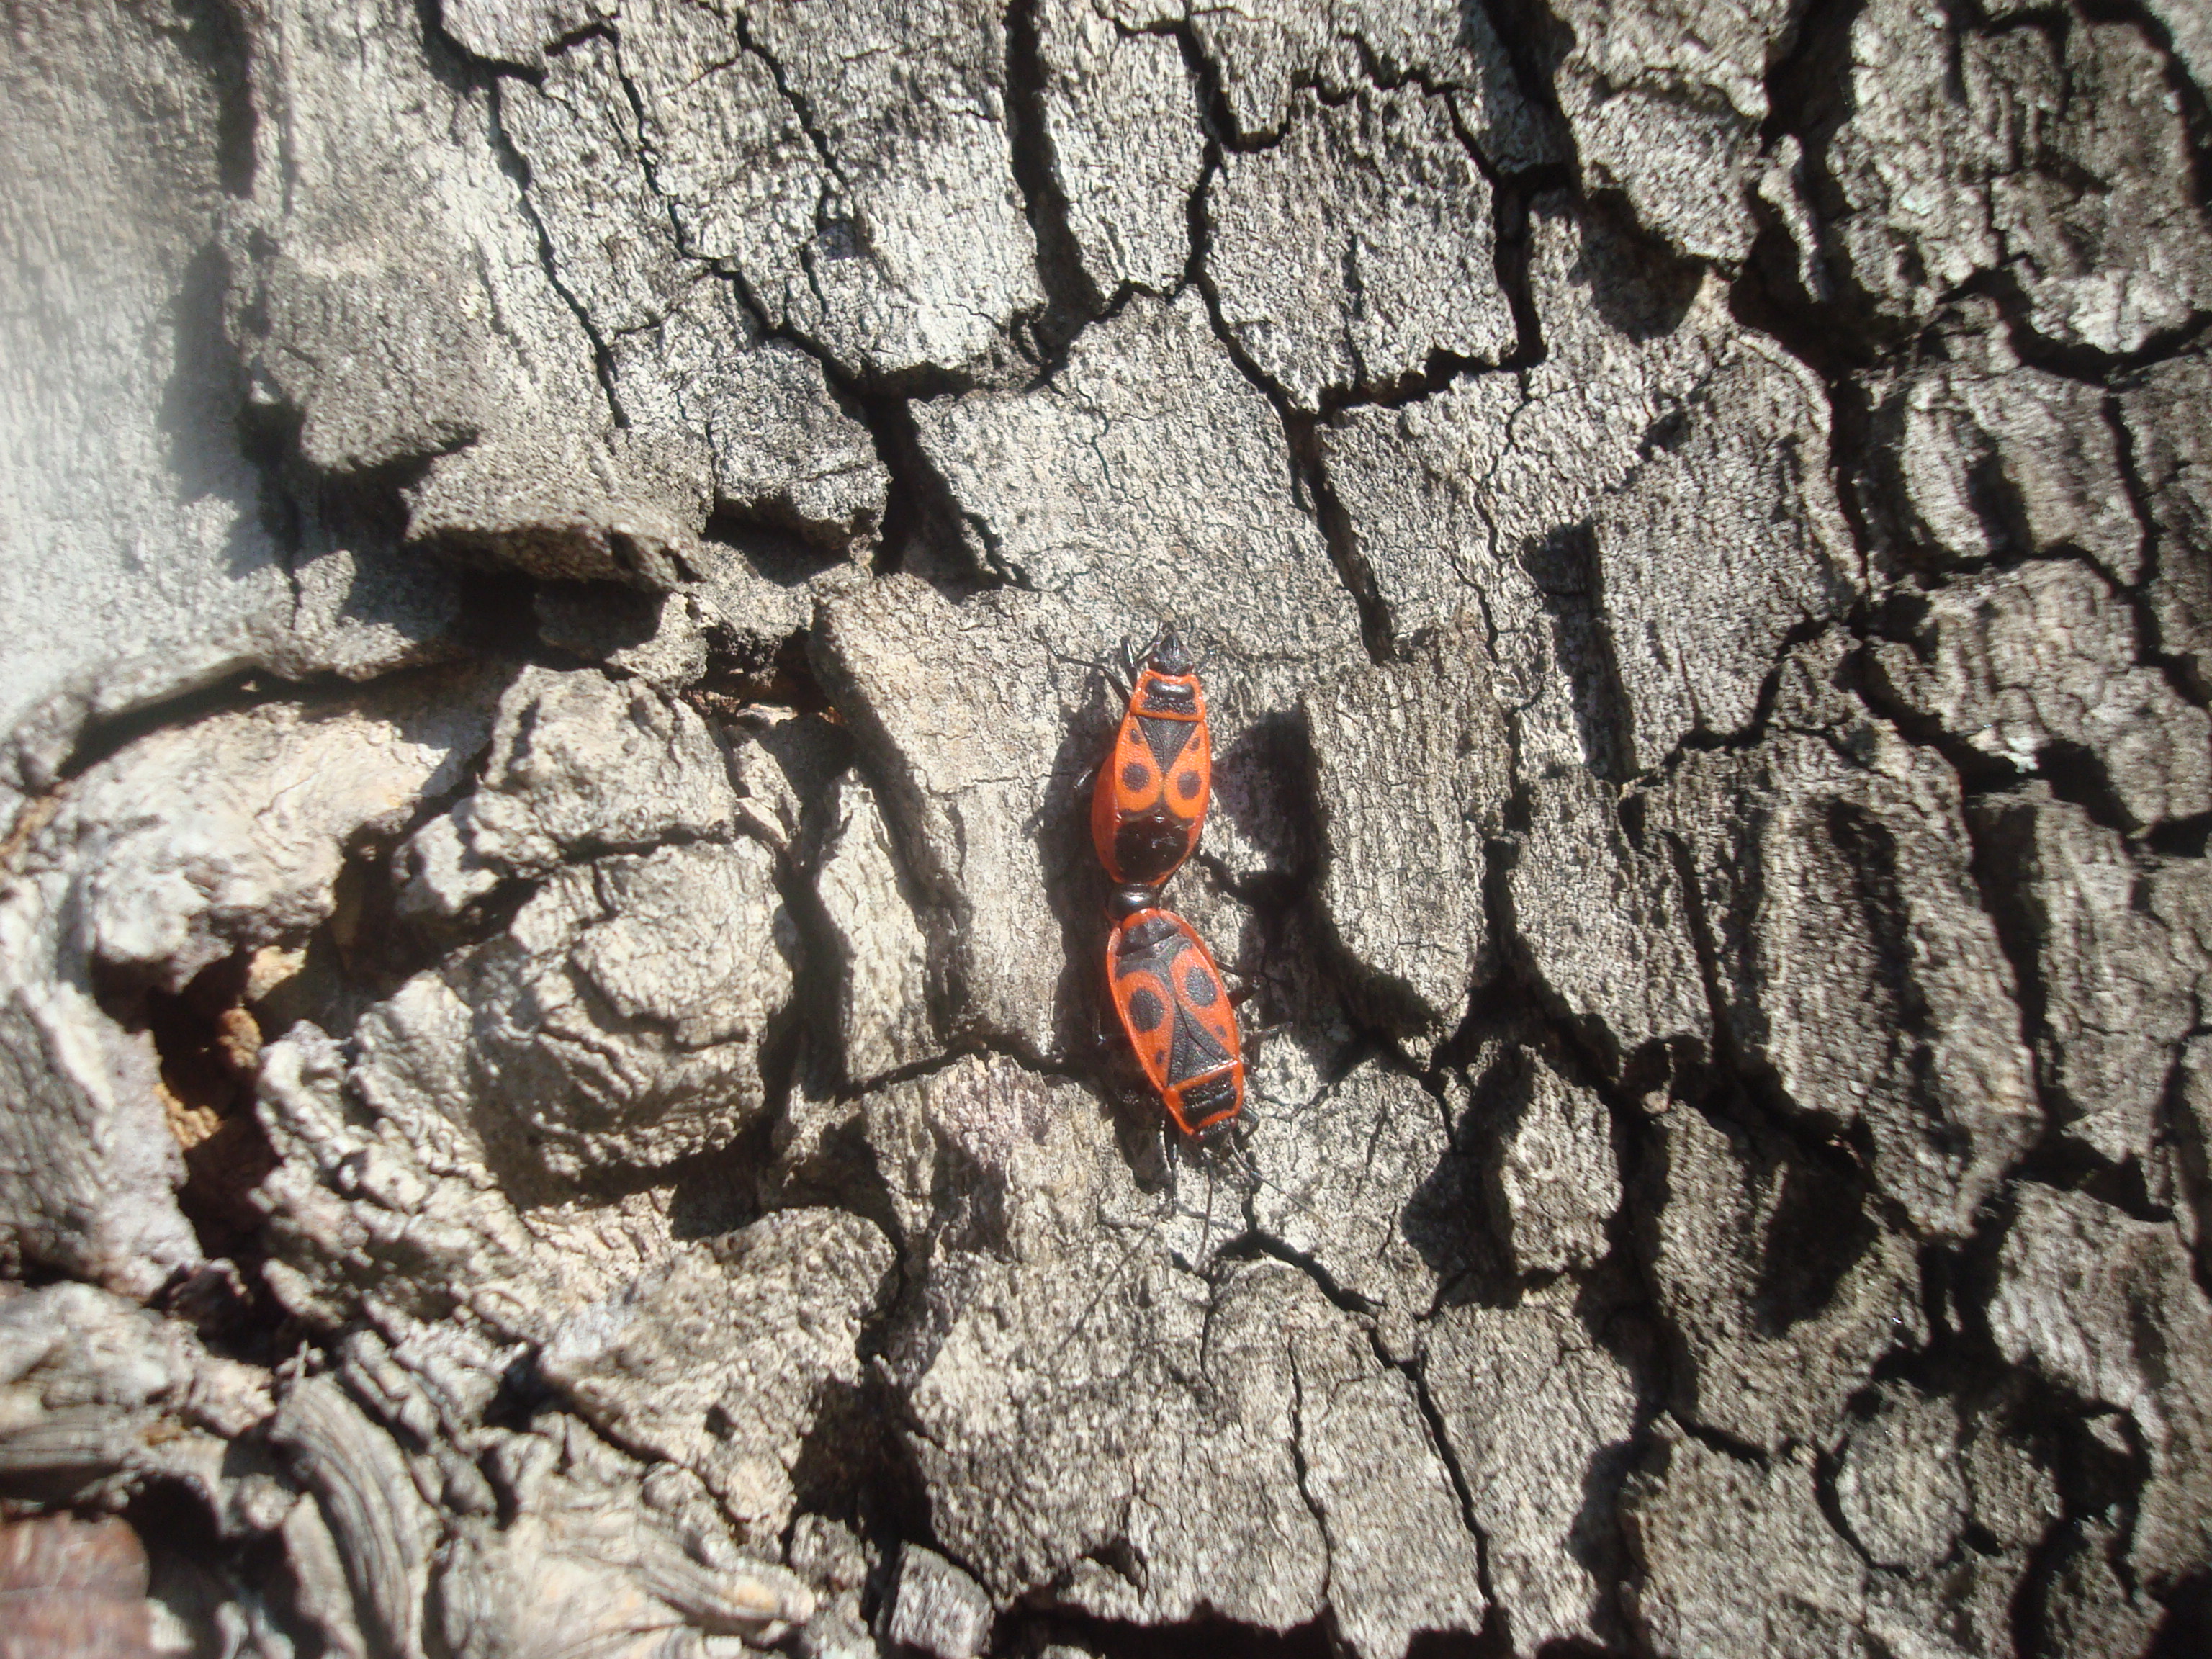 Bugs mating on a tree photo